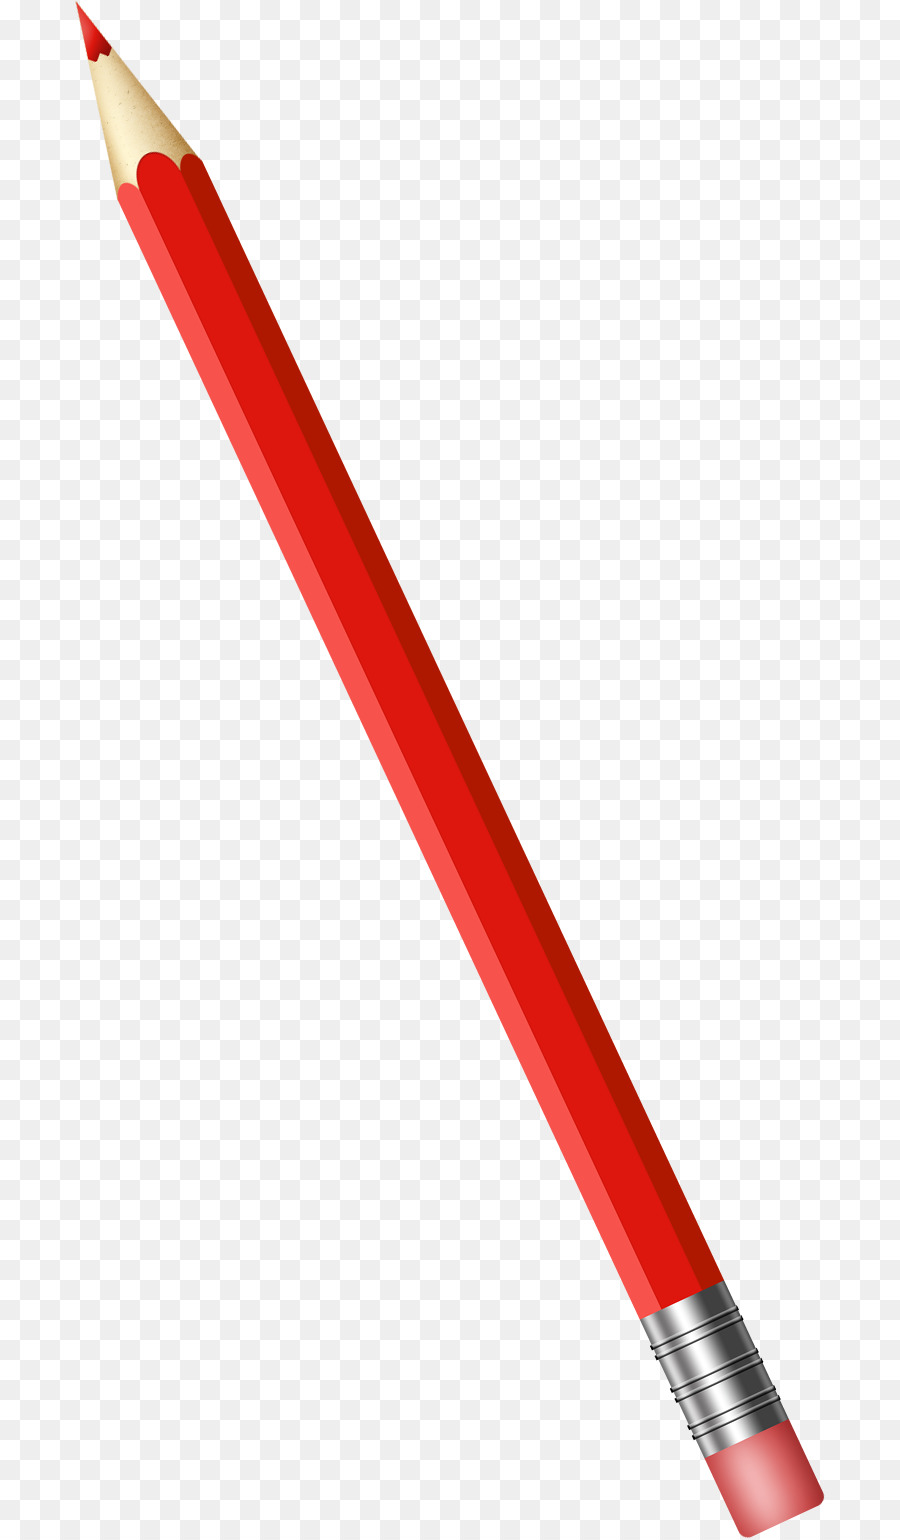 Red Pencil Sketch - Red pencil png download - 751*1539 - Free Transparent Red png Download.